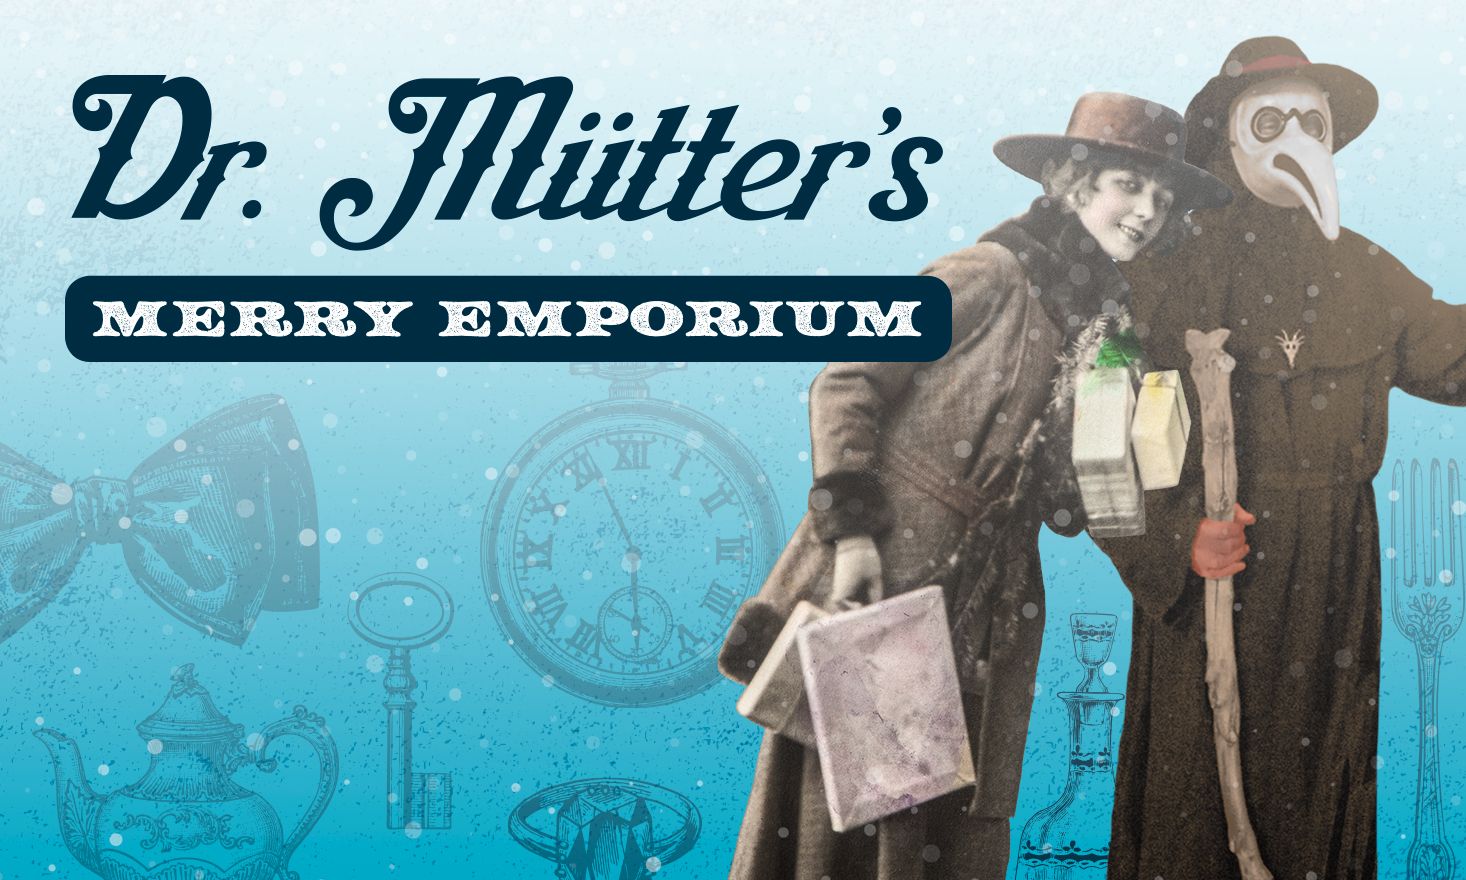 Ombre blue background with photo of plague doctor and woman carrying shopping backs. Words on top "Dr. Mütter's Merry Emporium"